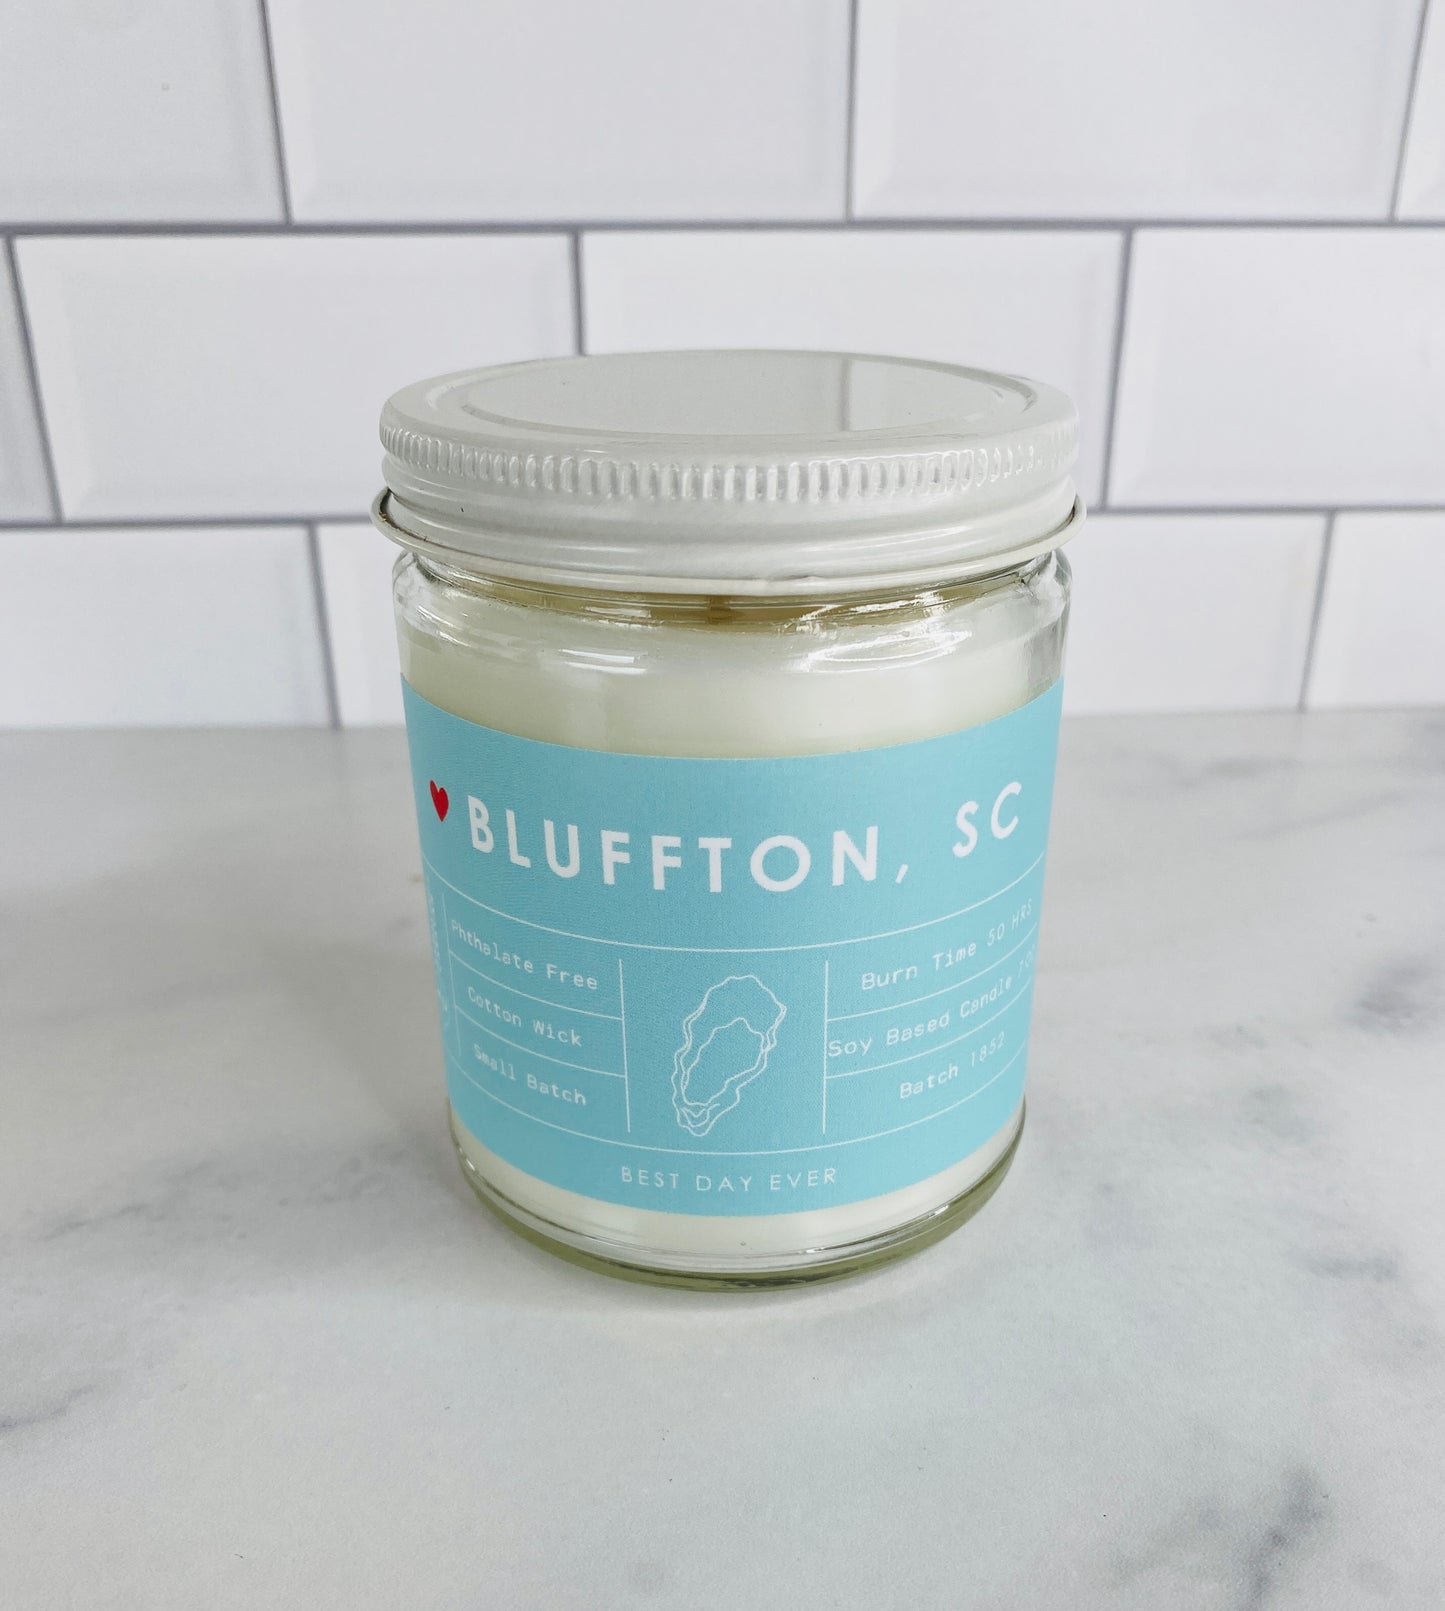 Bluffton, SC Candle